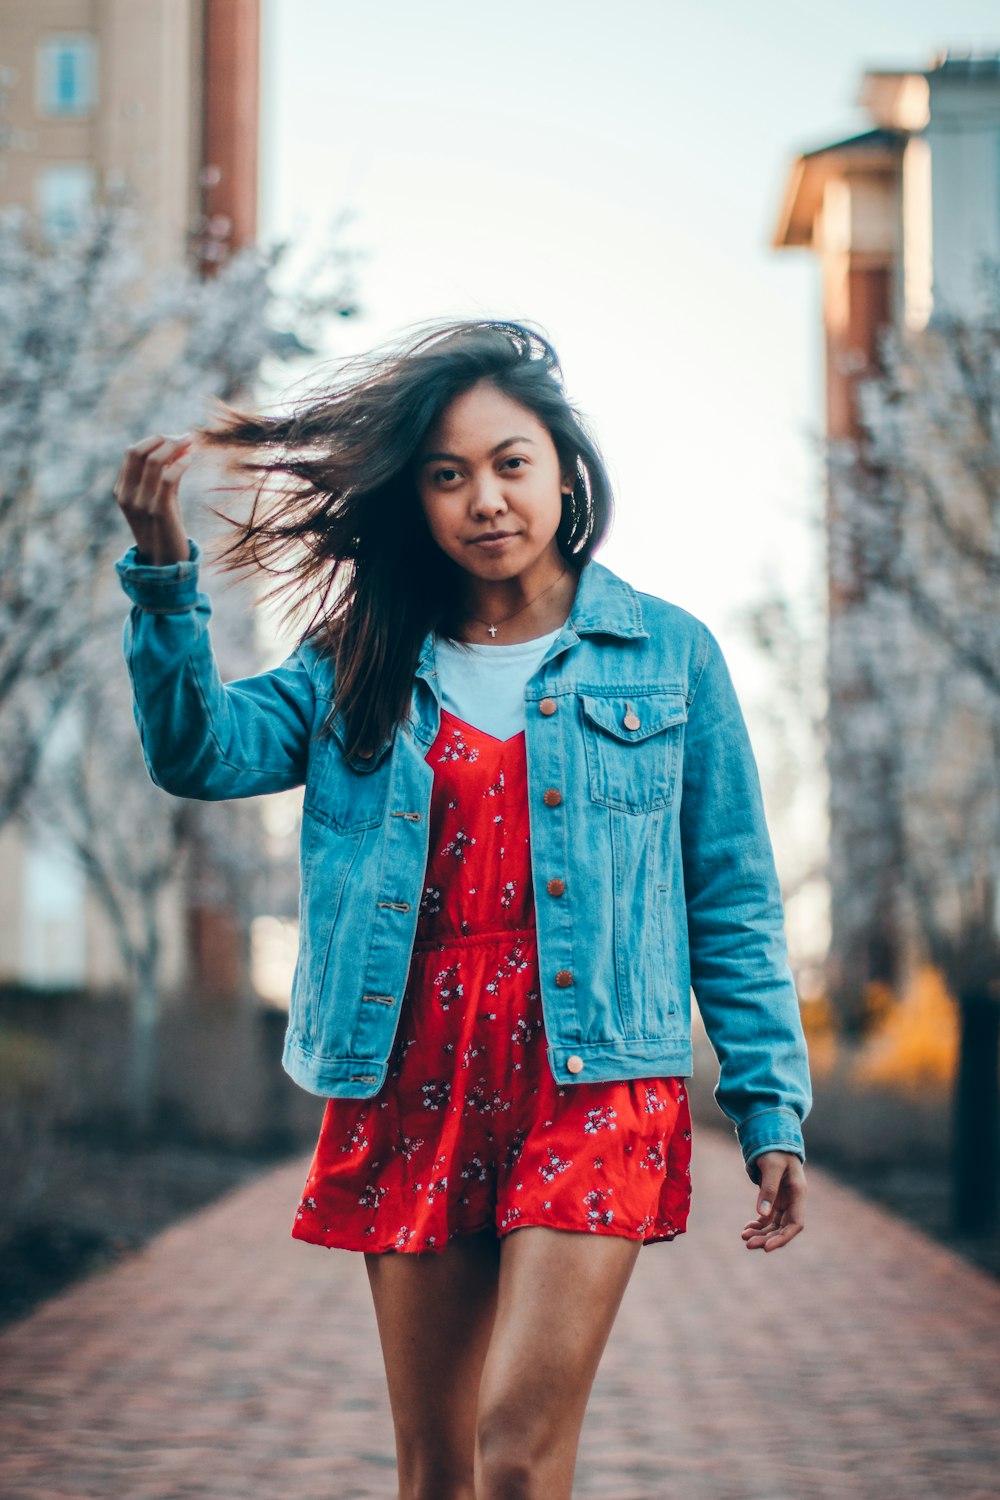 Standing woman wearing red dress and blue denim jacket photo – Free Flowers  Image on Unsplash